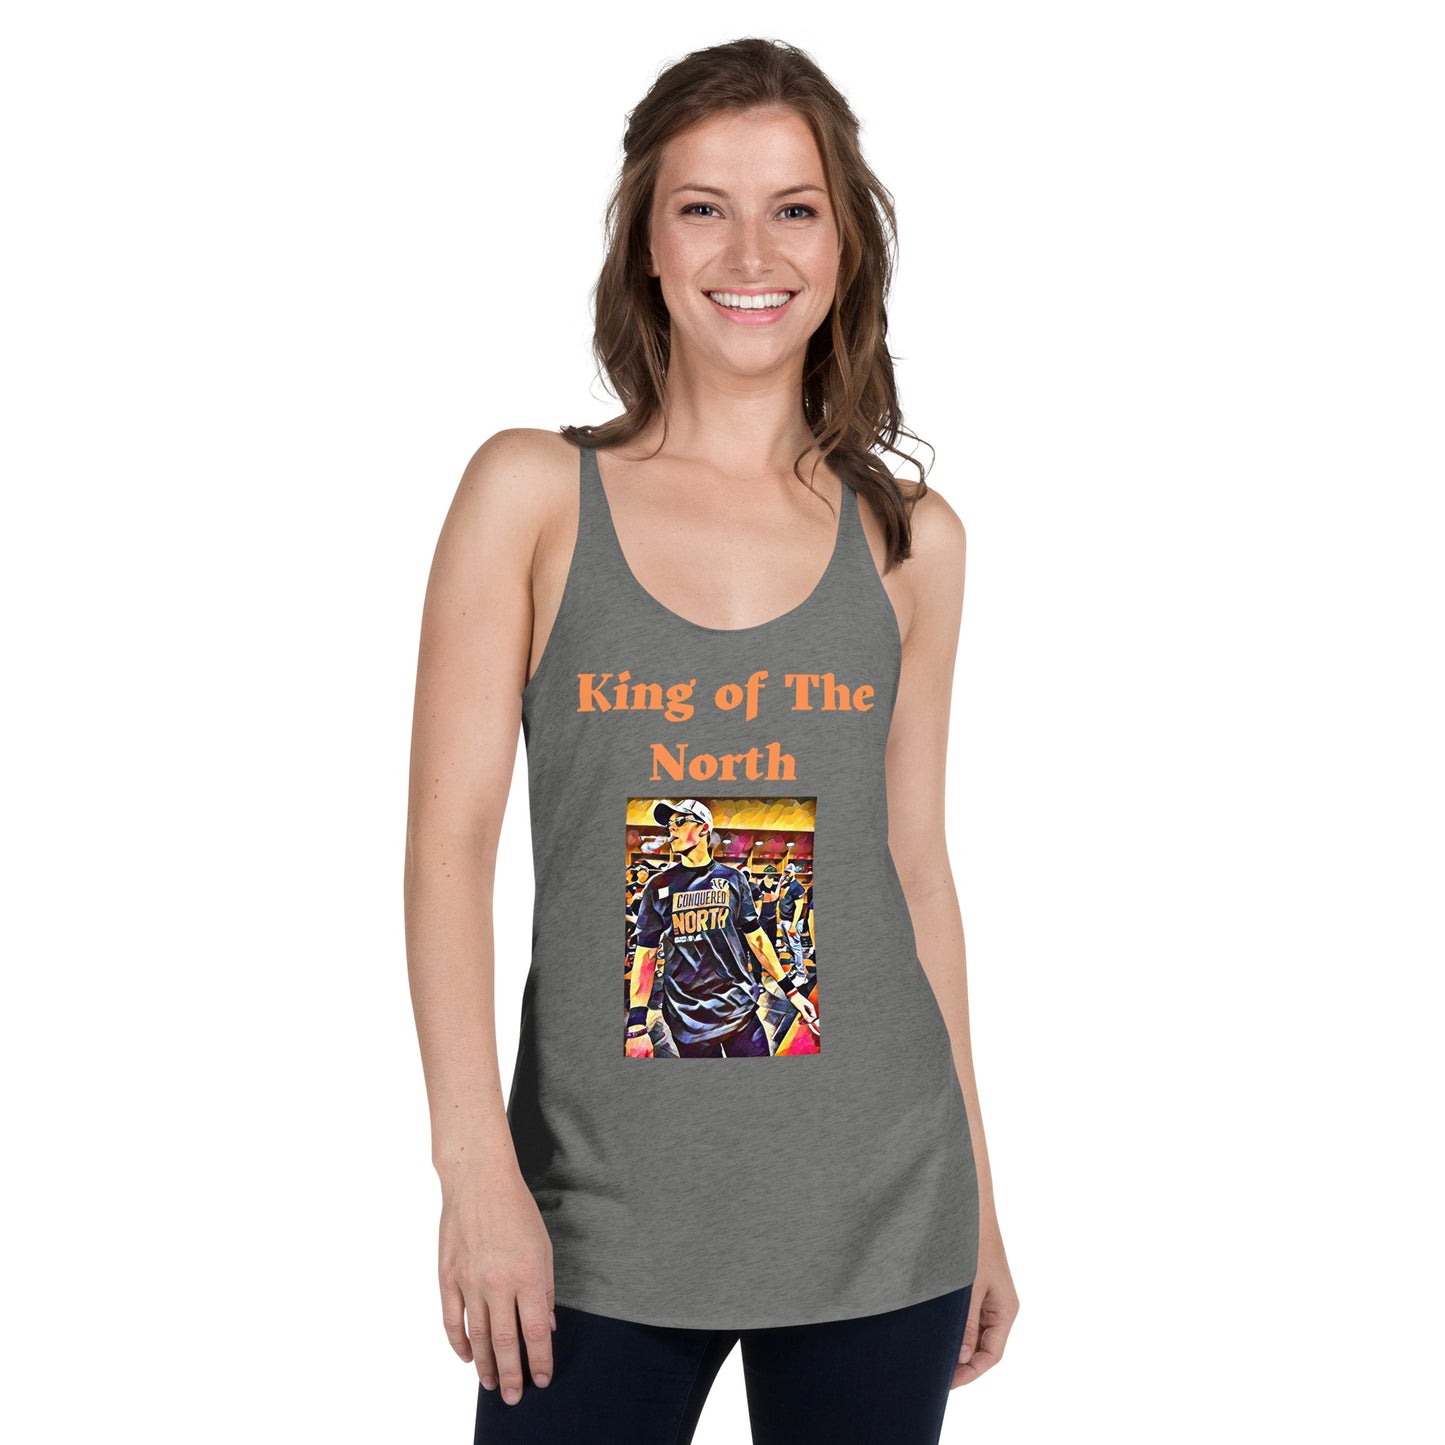 King of the North Women's Racerback Tank